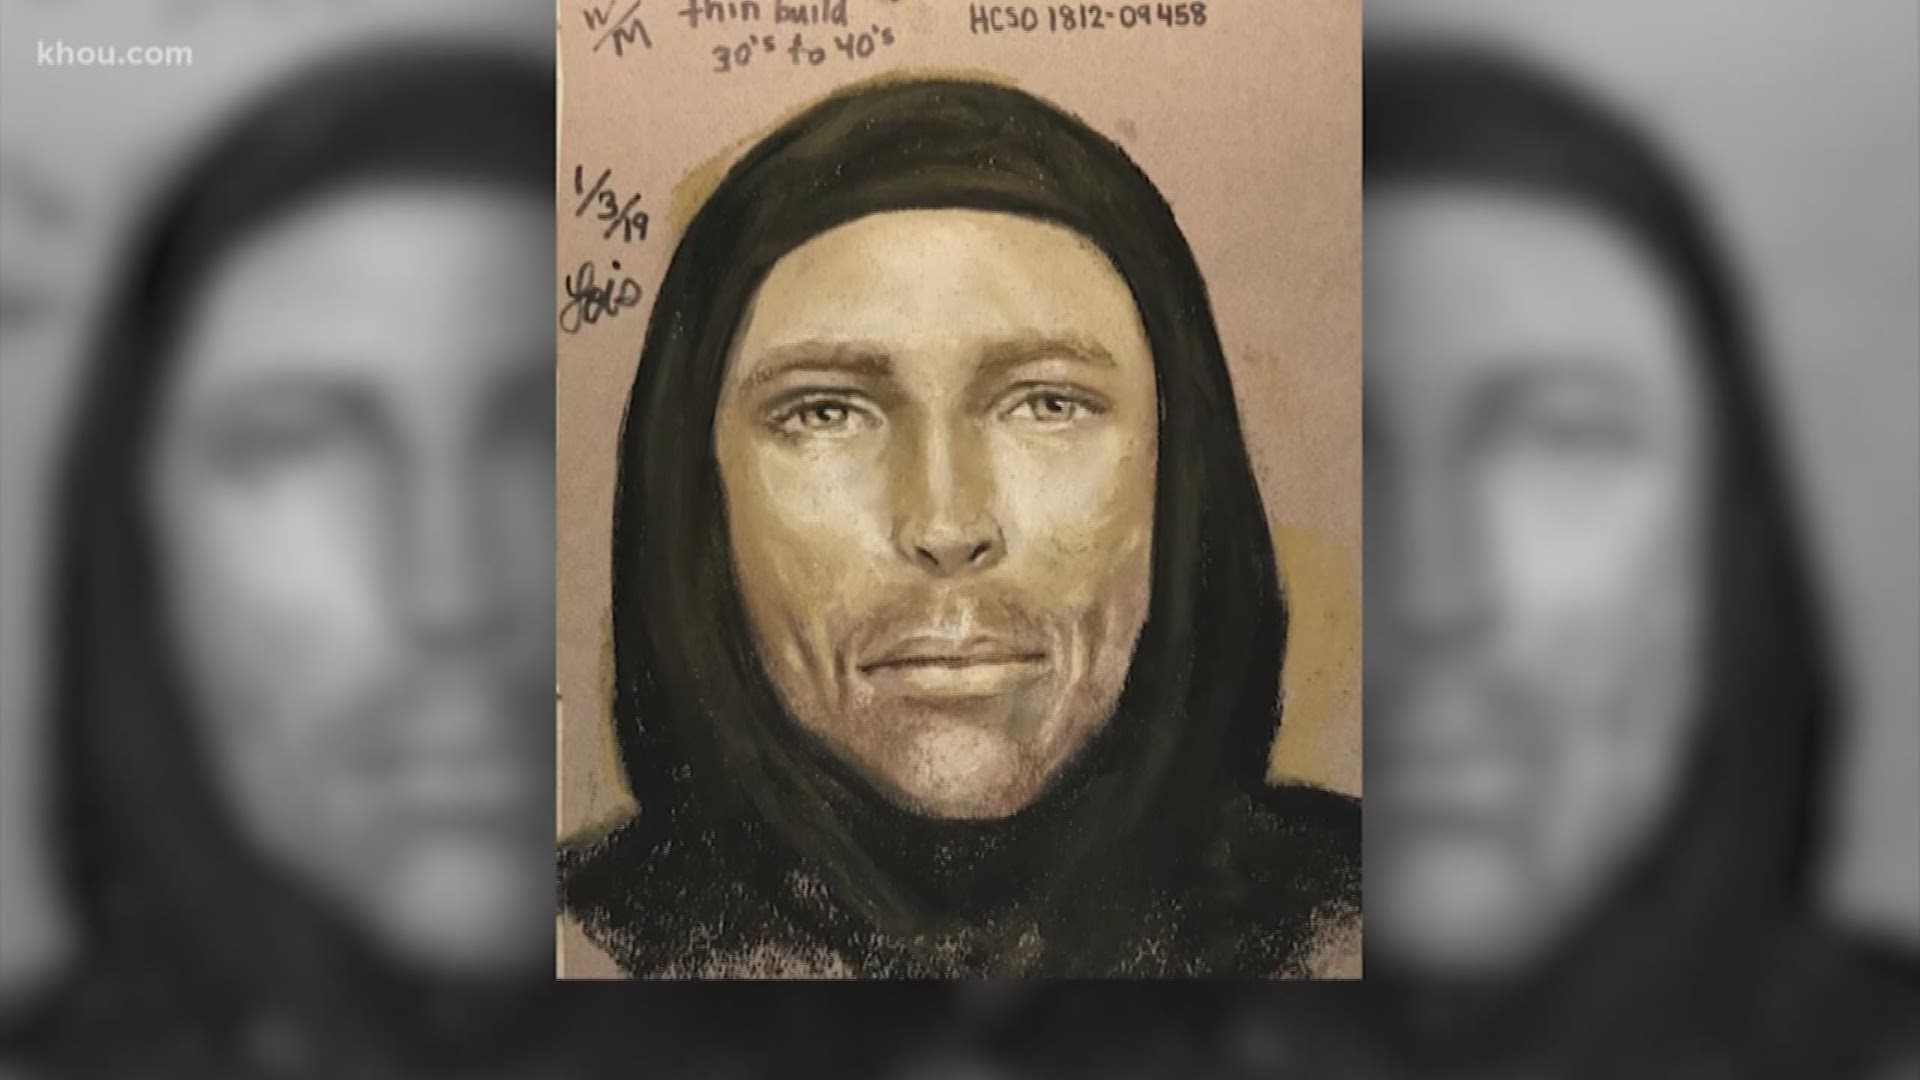 A composite sketch of the shooter who killed 7-year-old Jazmine Barnes in northeast Harris County has been released. We spoke with the artist who drew the sketch and answer viewer questions.